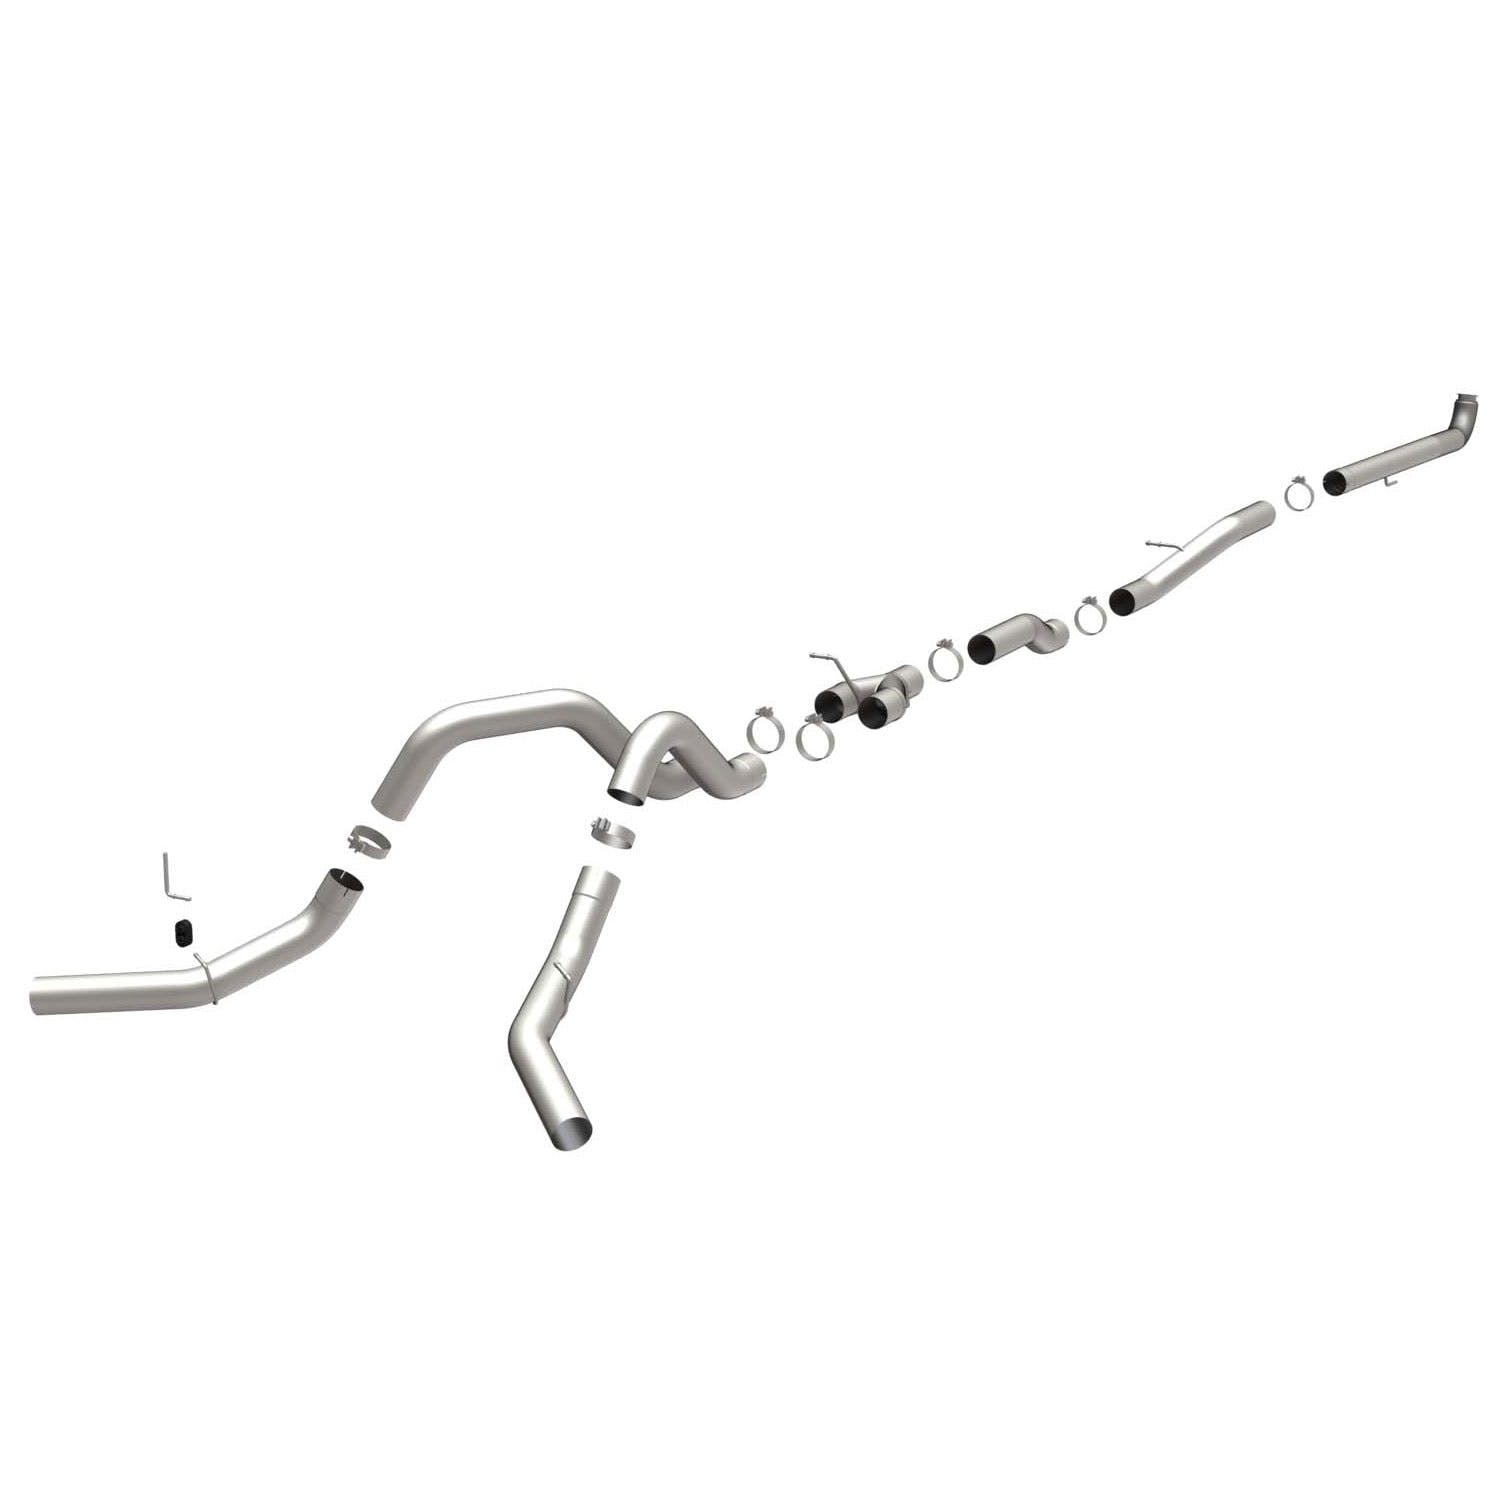 MagnaFlow Exhaust Products 18981 Cat Back-Diesel Aluminized